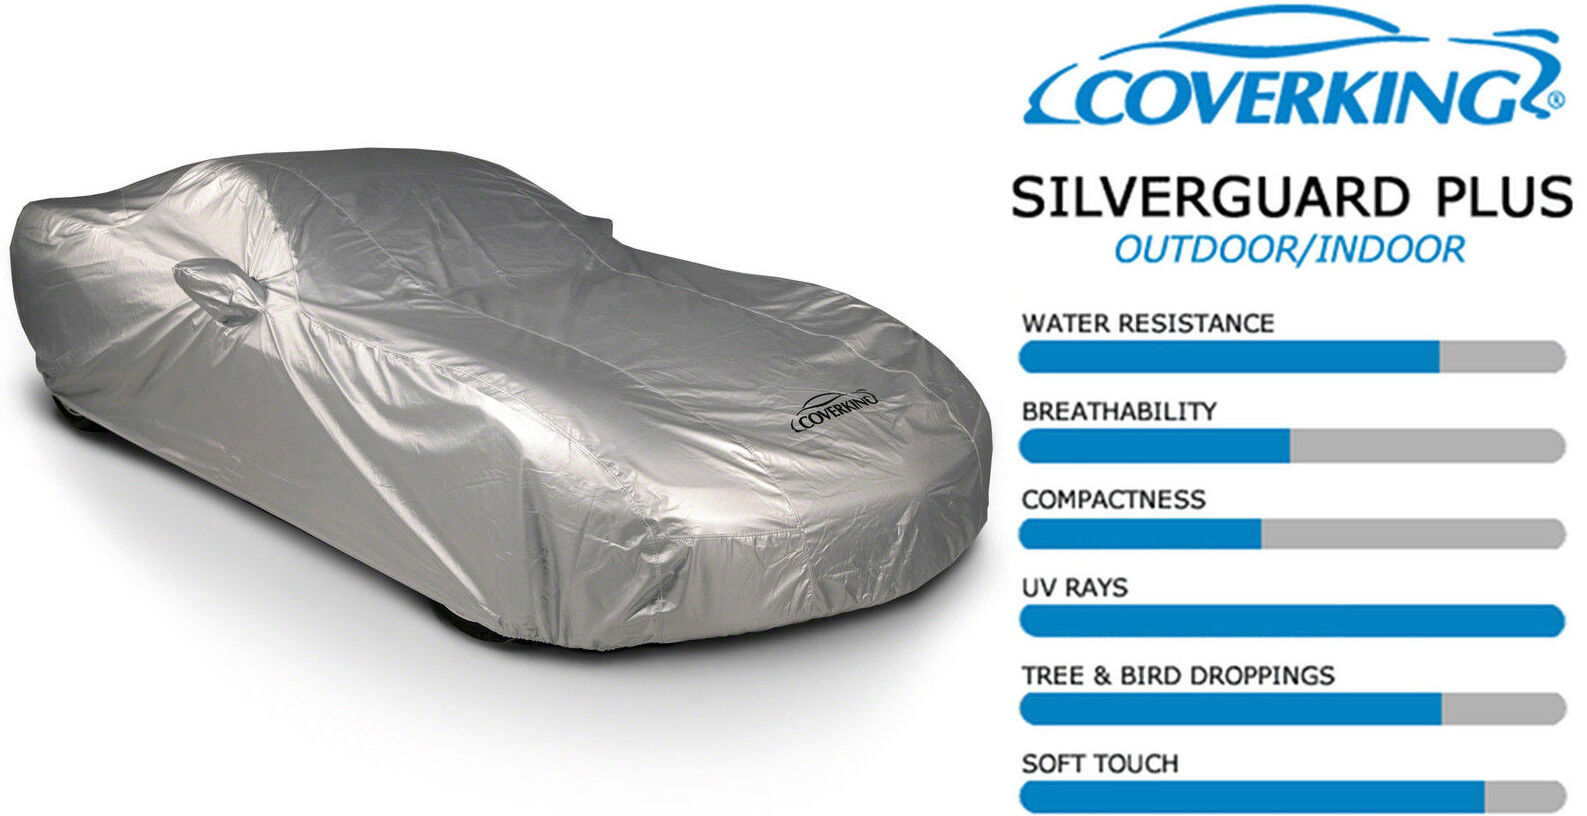 COVERKING Silverguard Plus™ all-weather CAR COVER 1978 Corvette Indy Pace Car